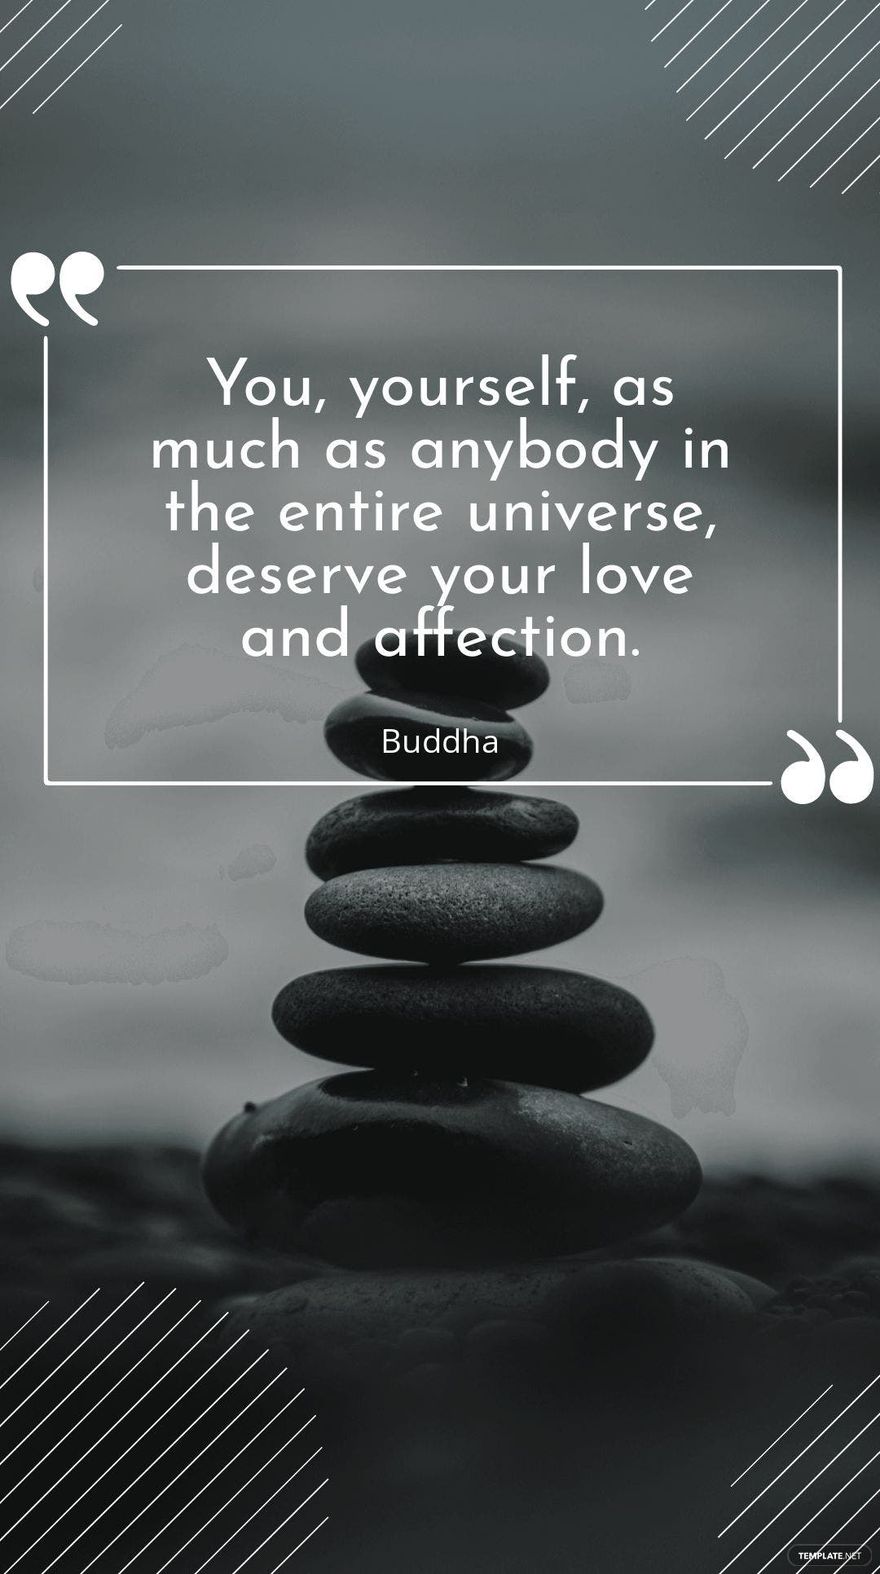 Free Buddha - “You, yourself, as much as anybody in the entire universe, deserve your love and affection.”  in JPG